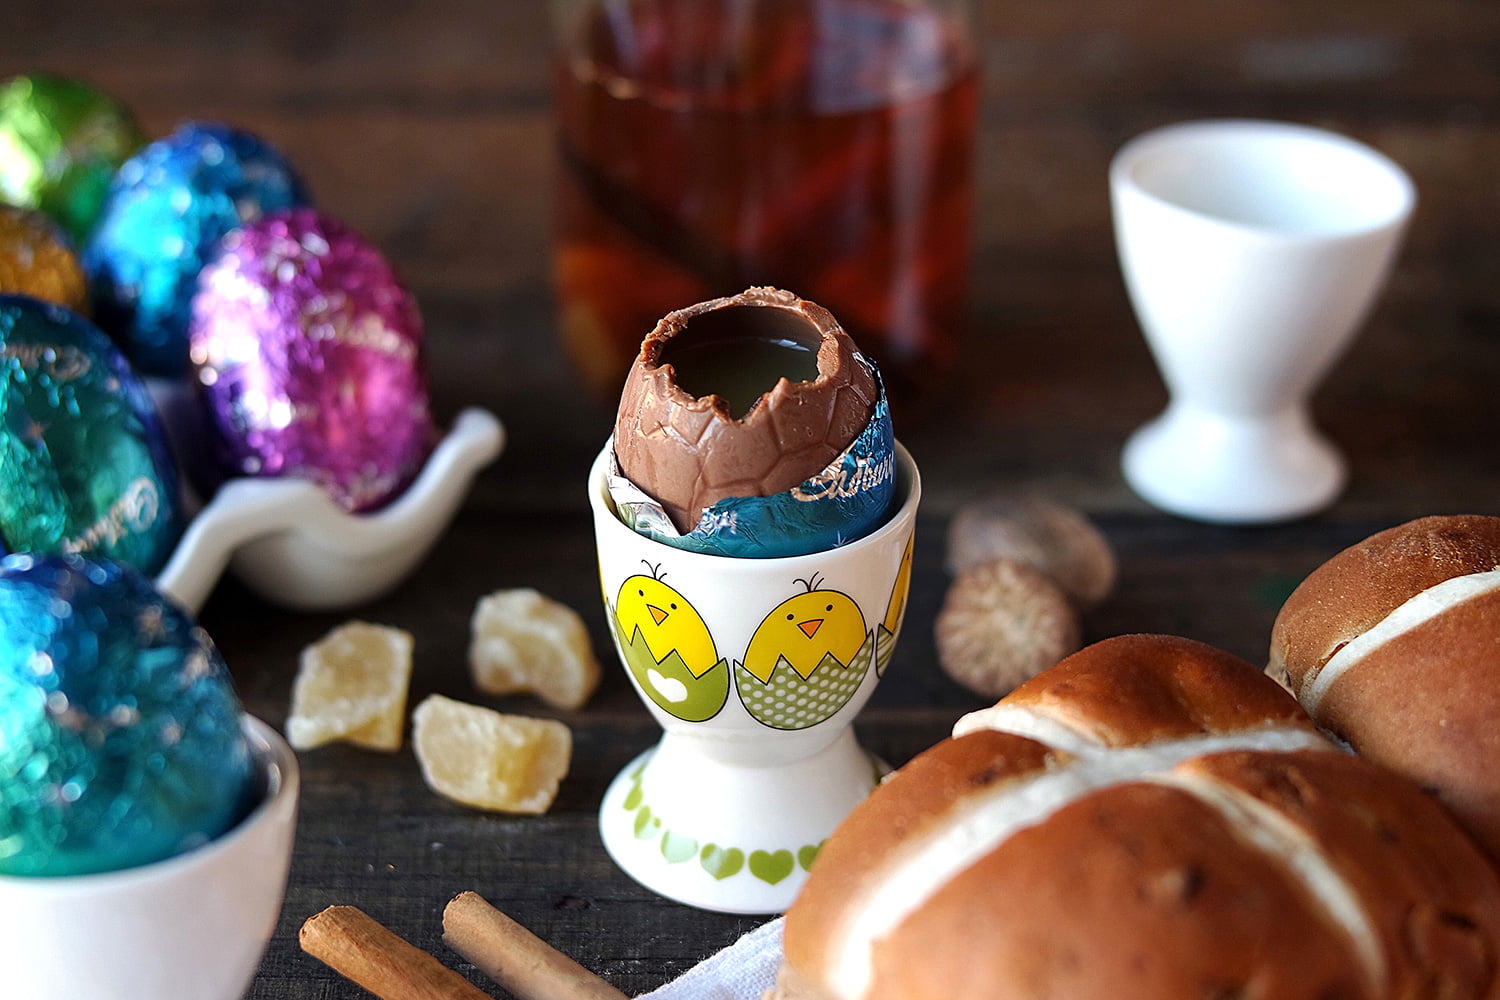 Hot Cross Bun Cocktails for Easter! Served in a hollow Chocolate Easter Egg